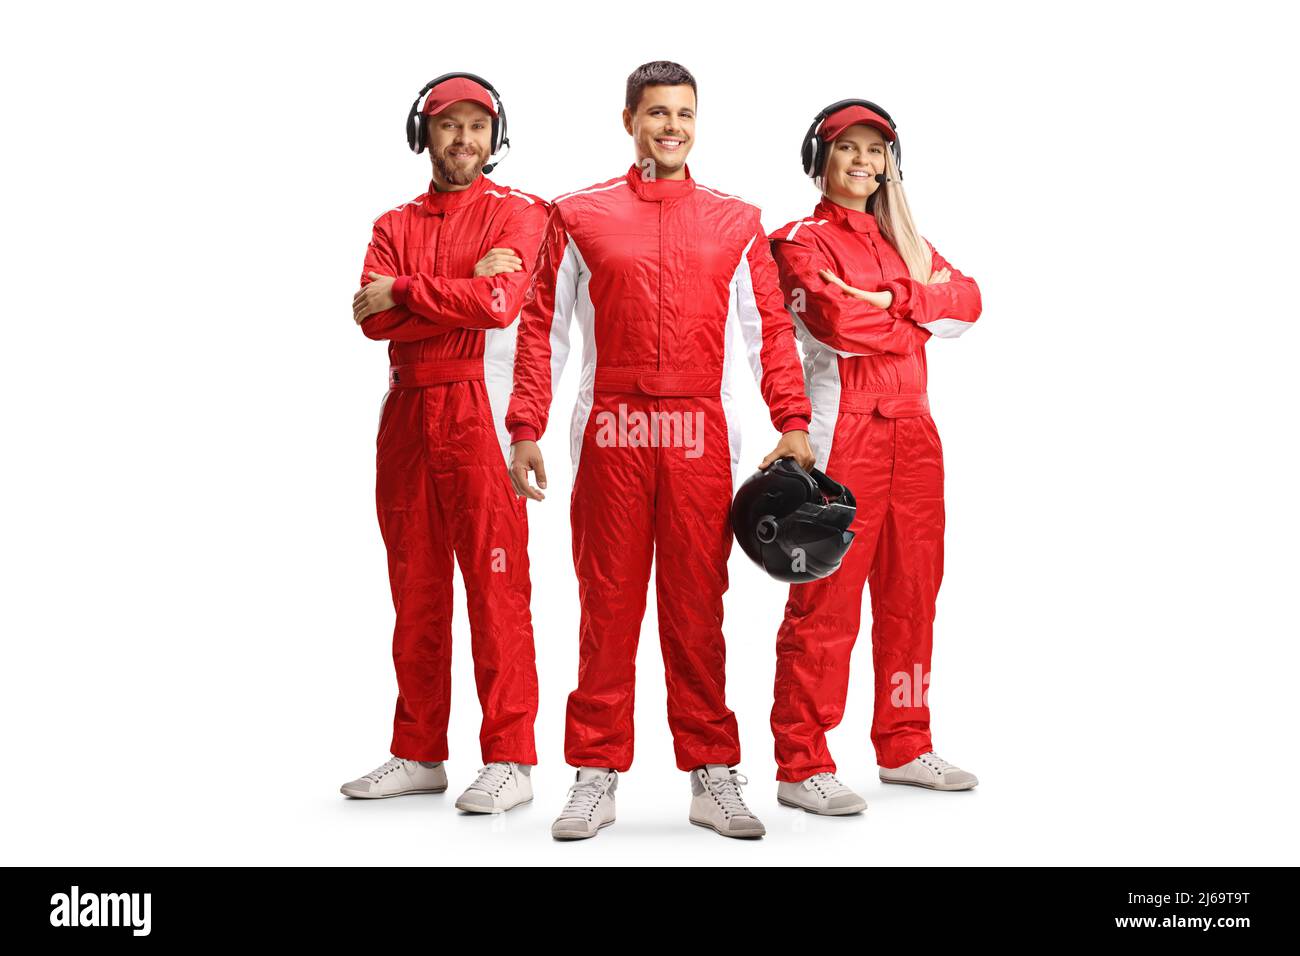 Racer and members of a racing team in red overall suits posing and looking at camera isolated on white background Stock Photo